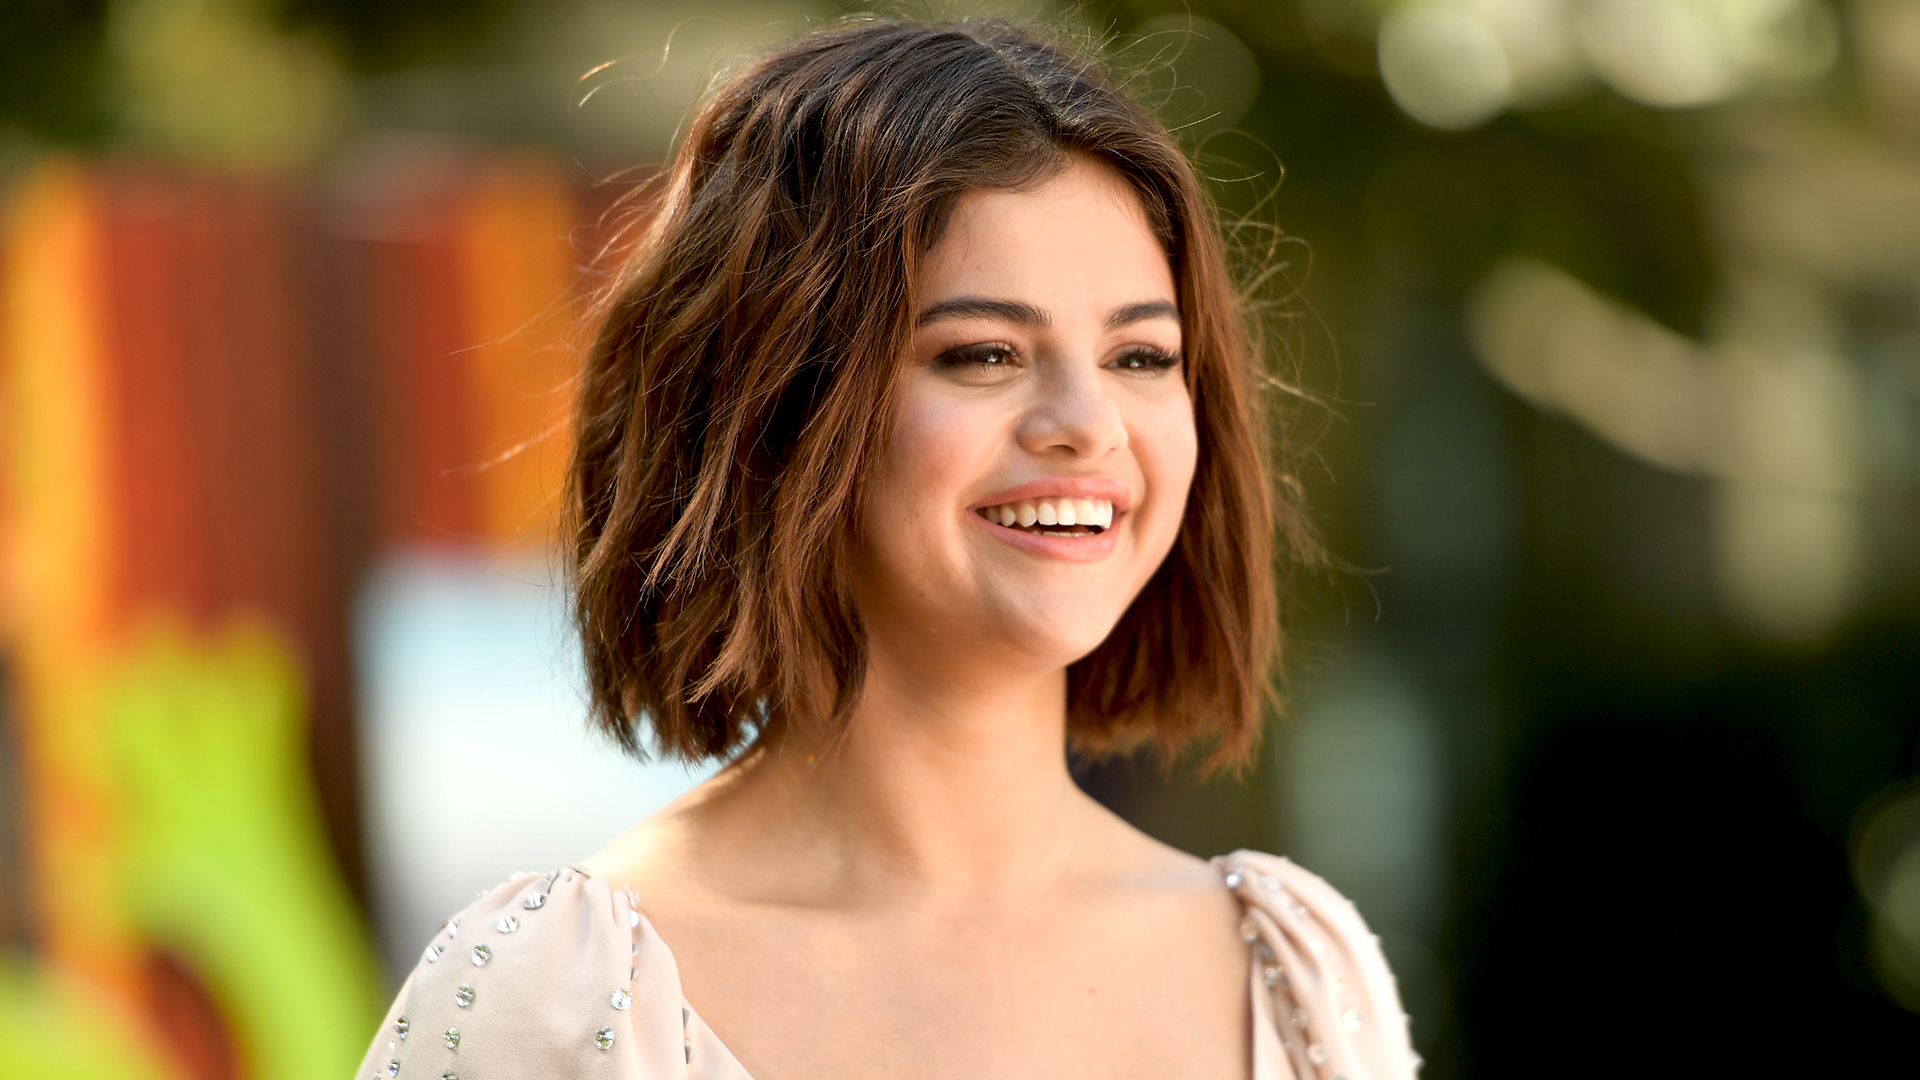 CULVER CITY, CA - APRIL 11:  Selena Gomez attends the photo call for Sony Pictures' "Hotel Transylvania 3: Summer Vacation" at Sony Pictures Studios on April 11, 2018 in Culver City, California.  (Photo by Matt Winkelmeyer/Getty Images)